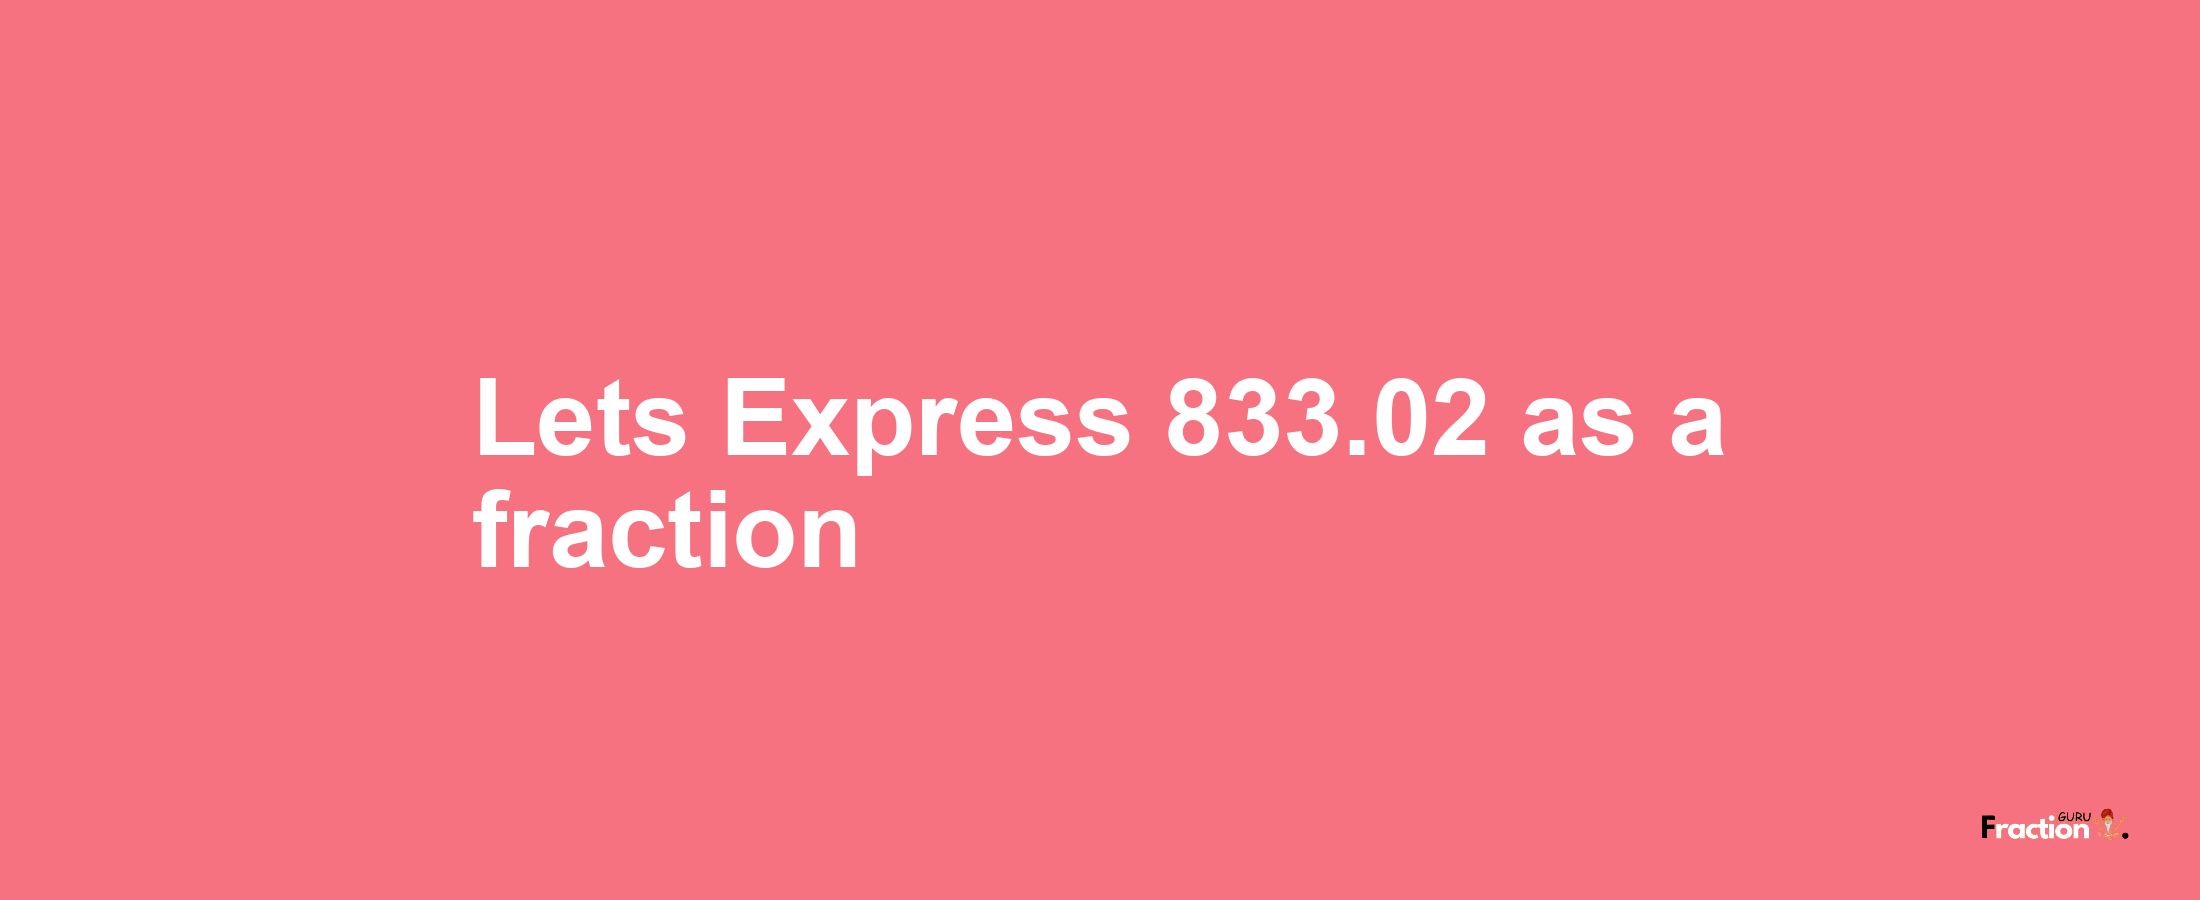 Lets Express 833.02 as afraction